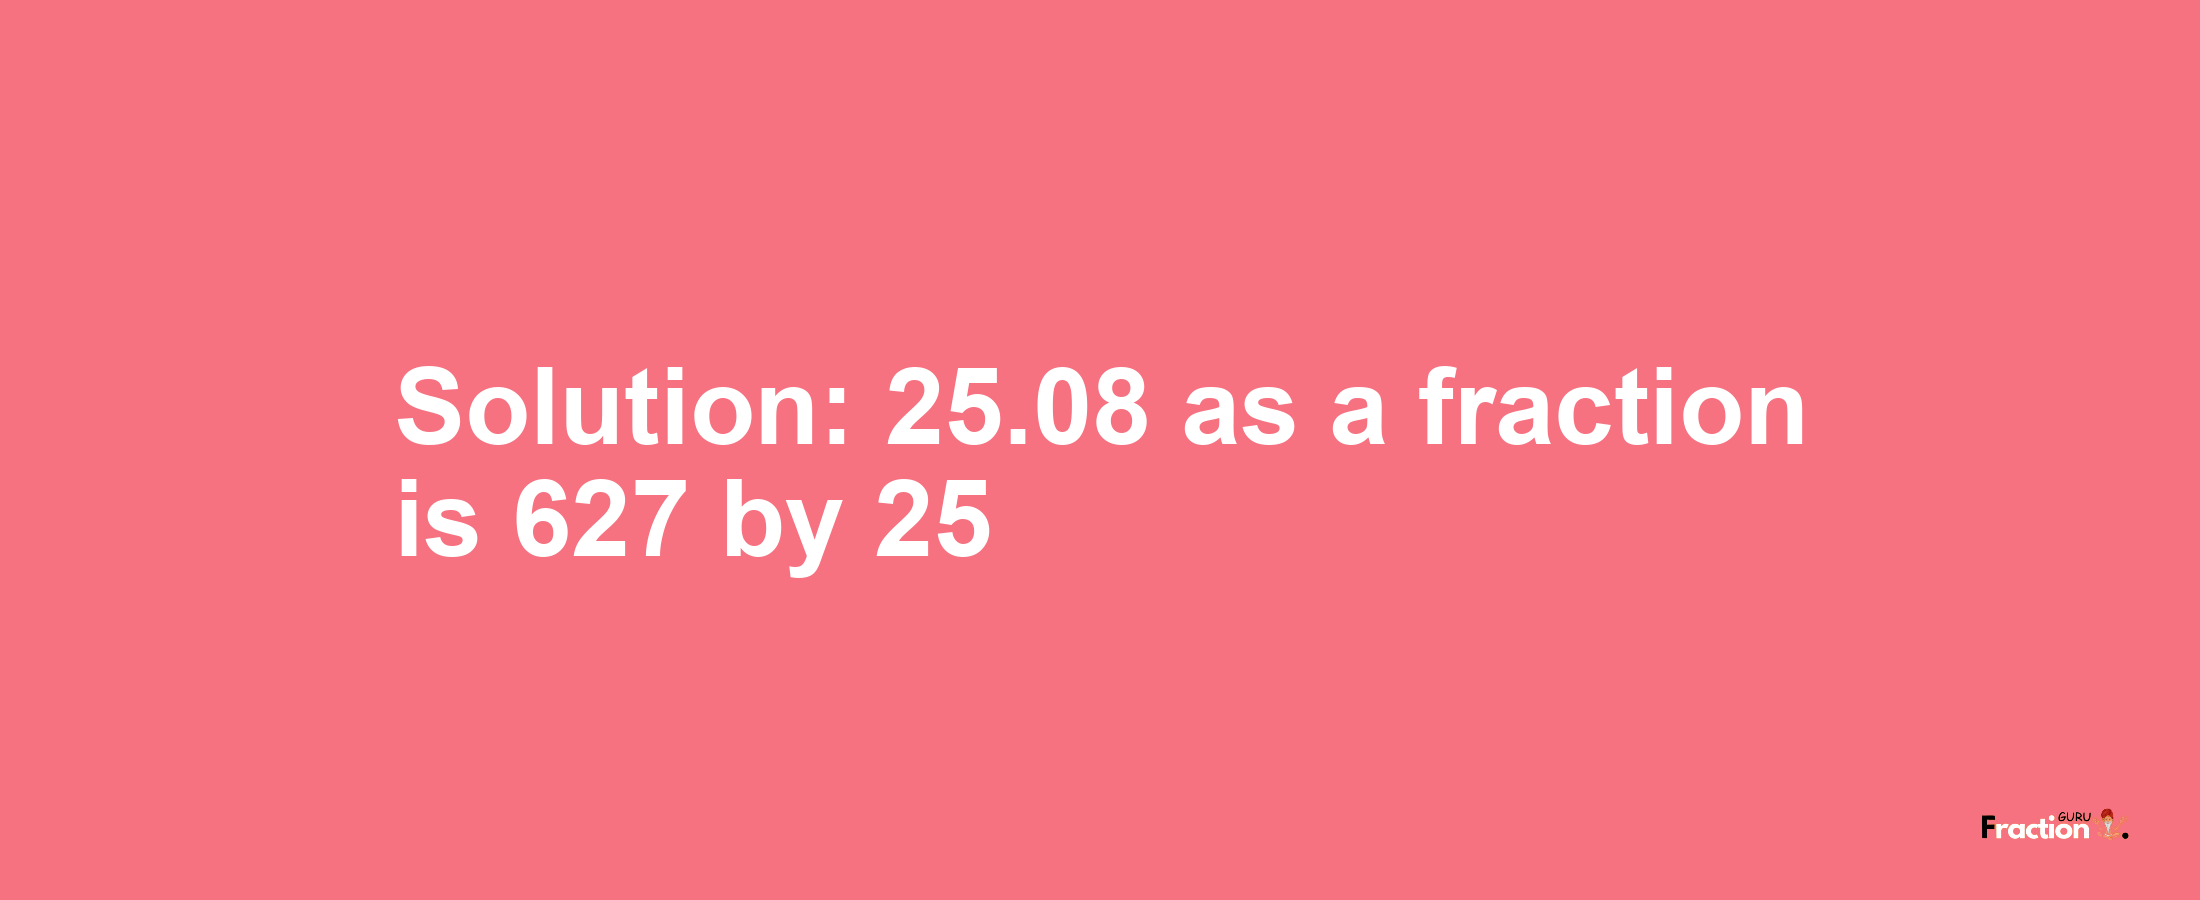 Solution:25.08 as a fraction is 627/25